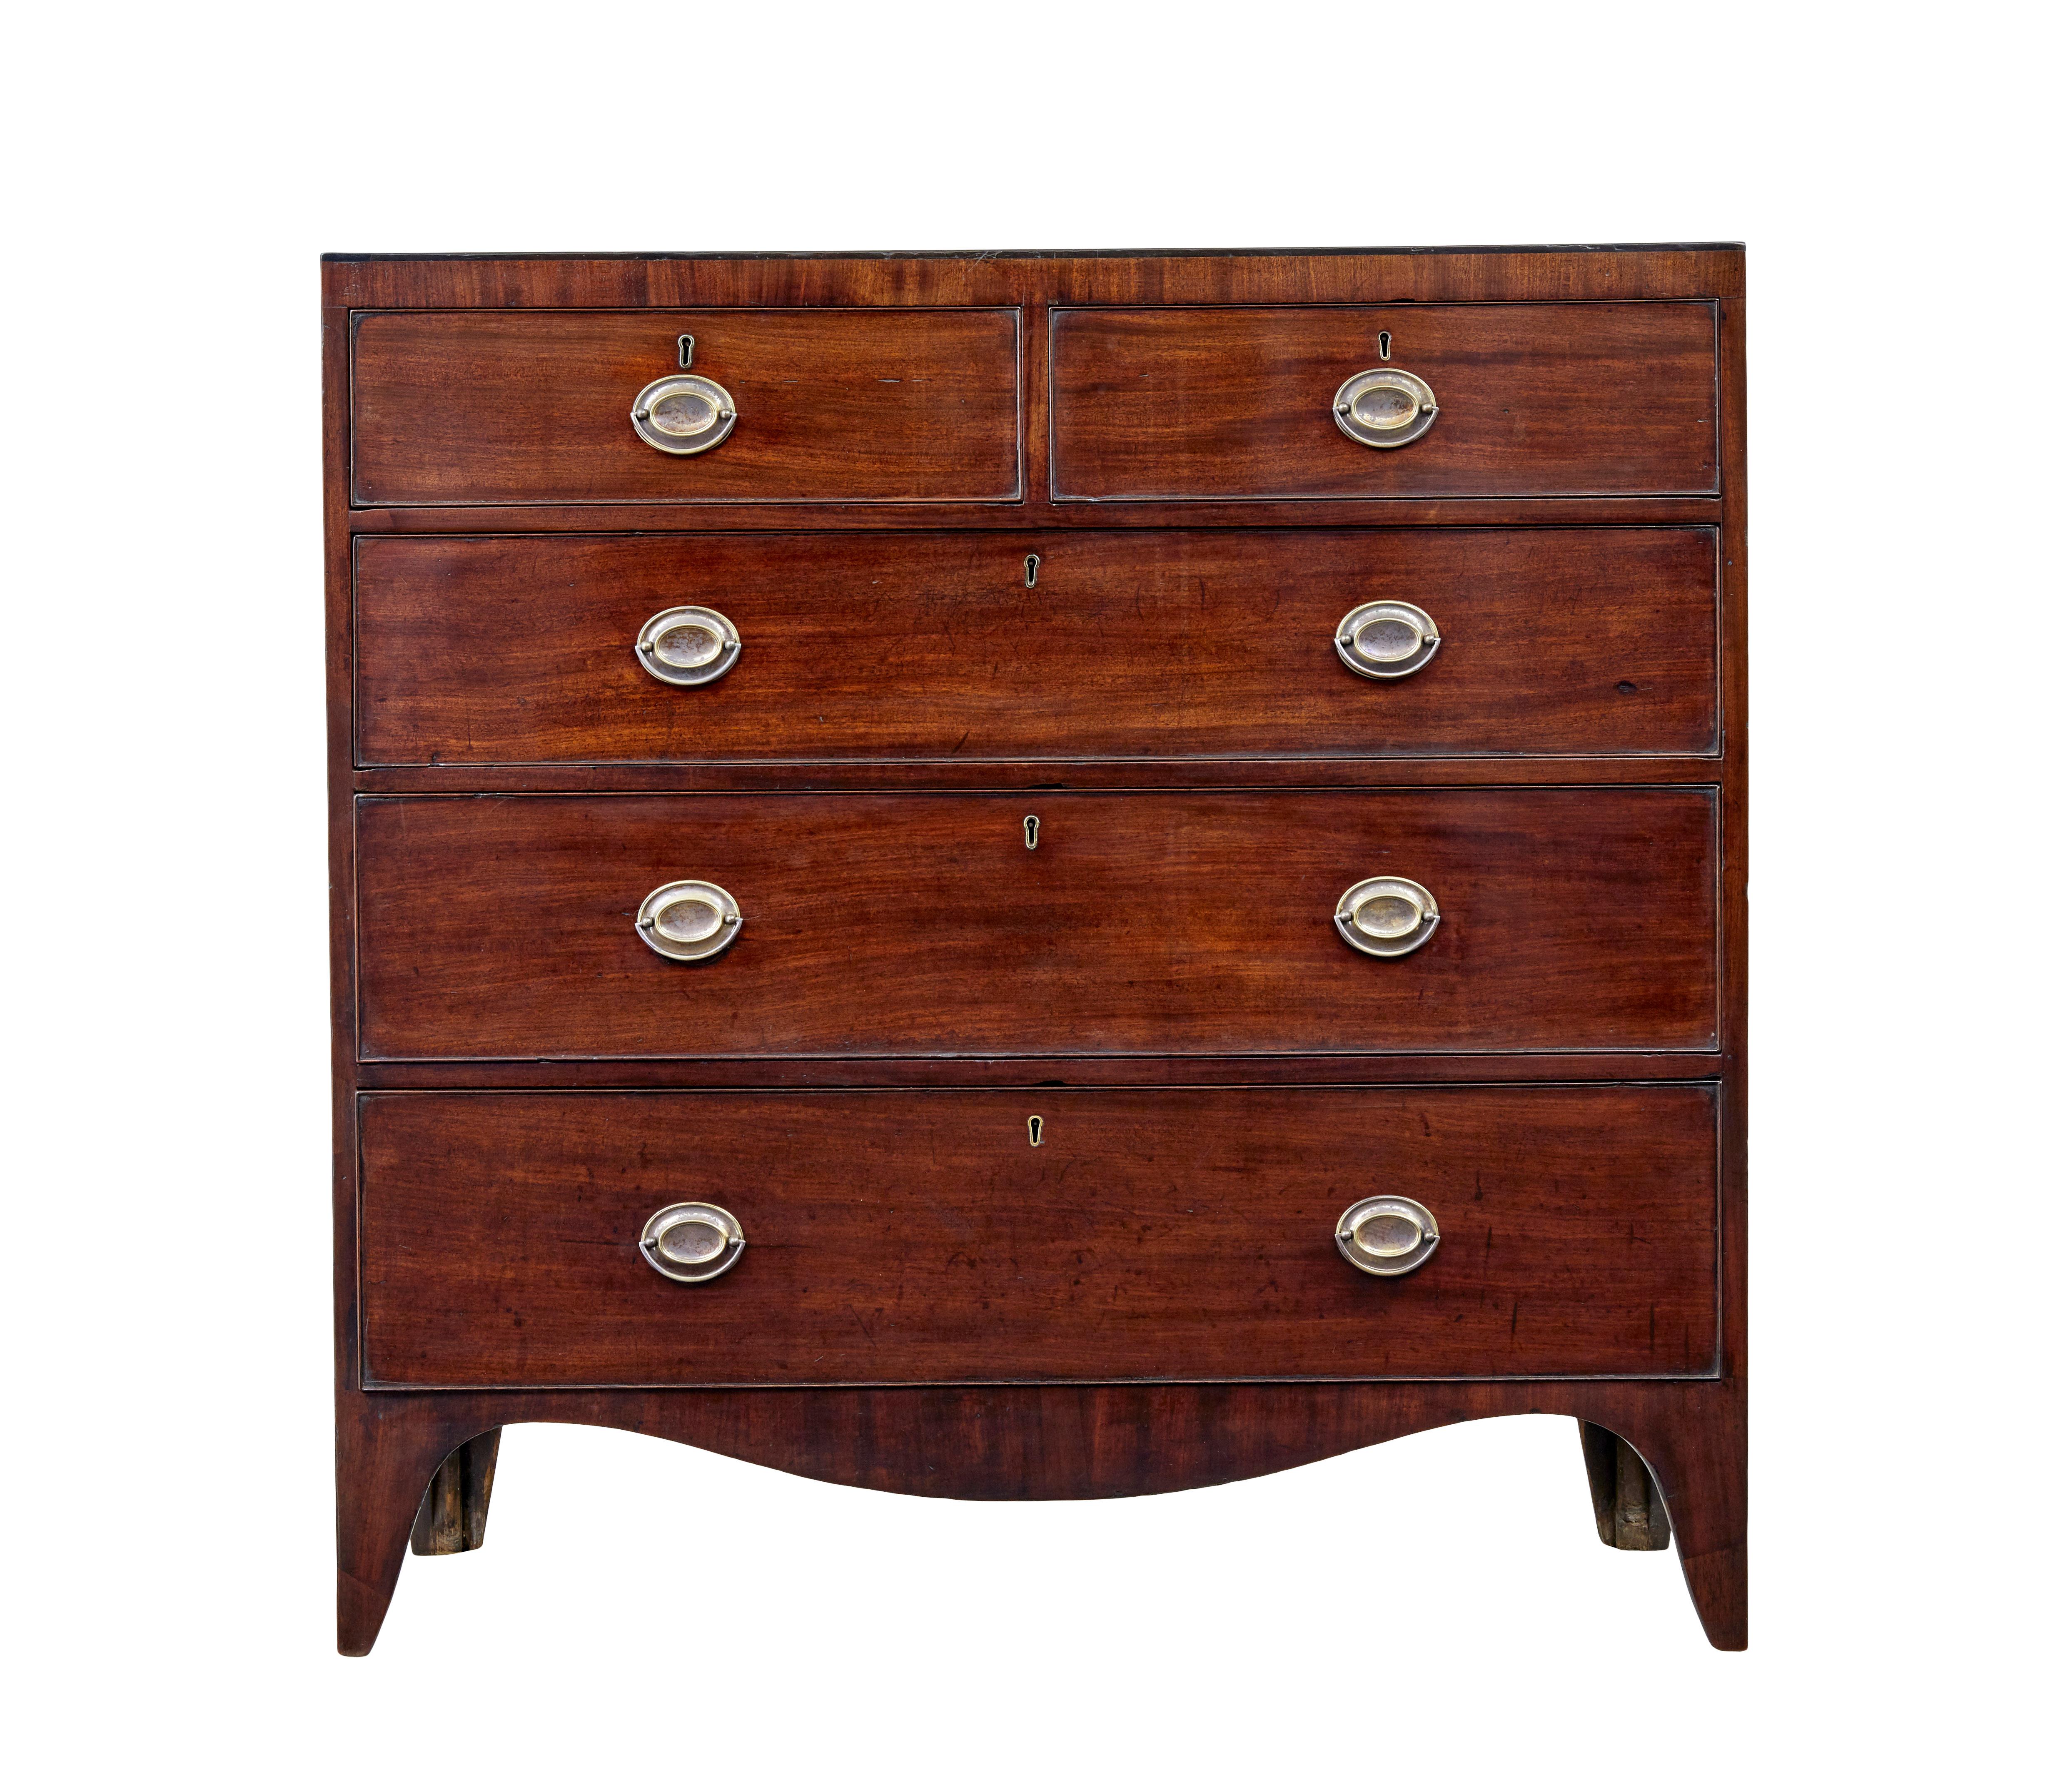 19th century mahogany chest of drawers circa 1880.

Good quality 19th century chest of drawers in the regency taste ready for everyday use.  Straight design with ebonised stringing to the top surface.  2 over 3 drawer layout with a slight graduating